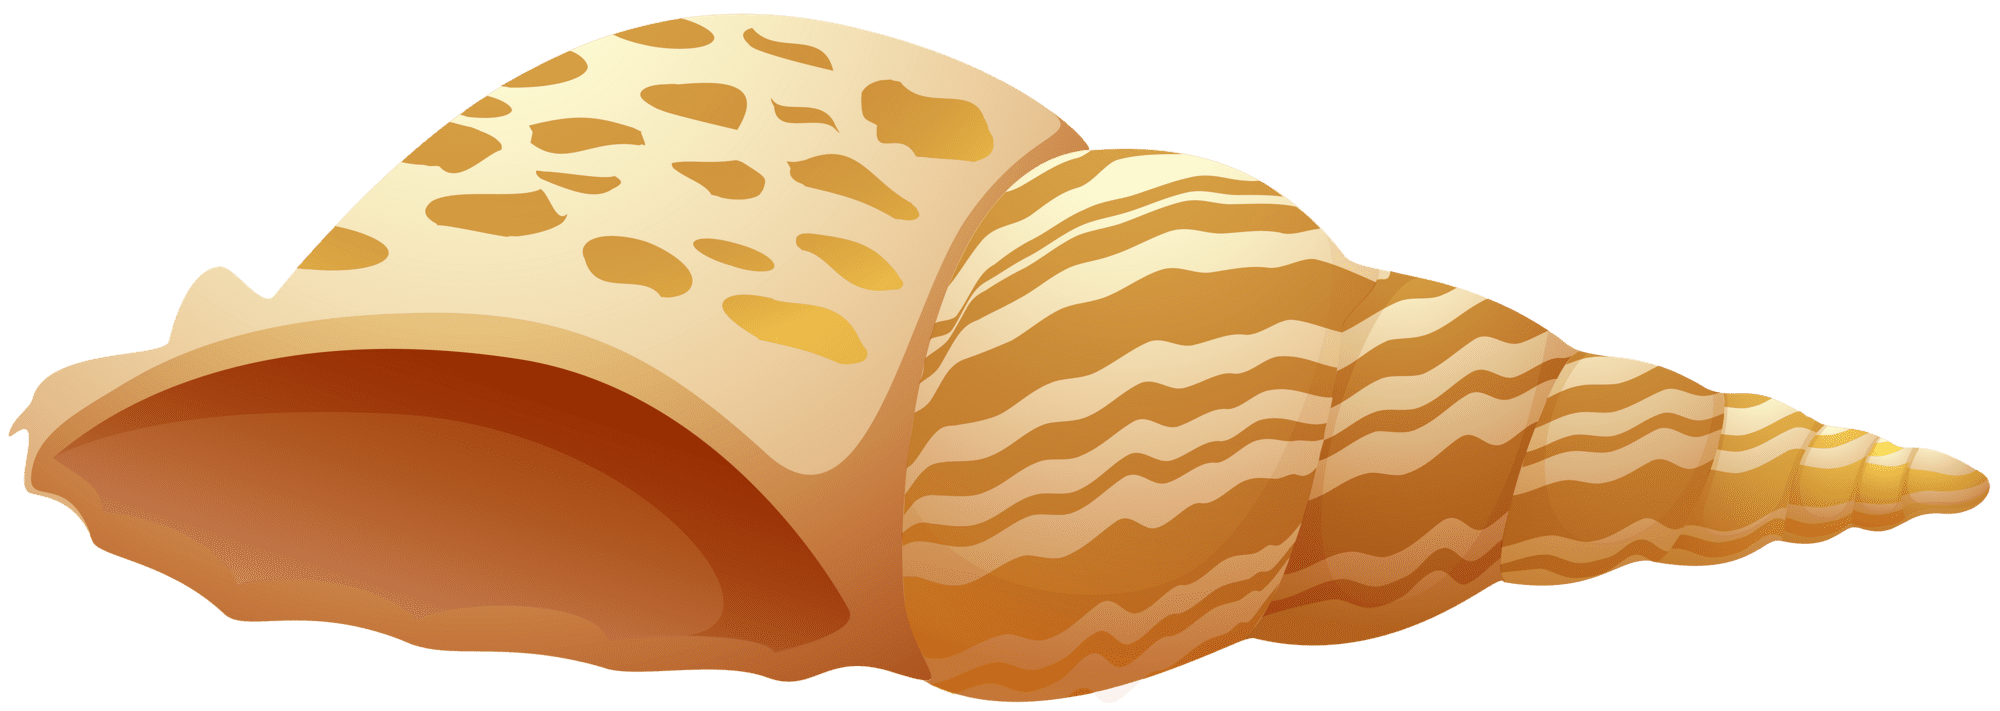 Sea shell clipart best picture